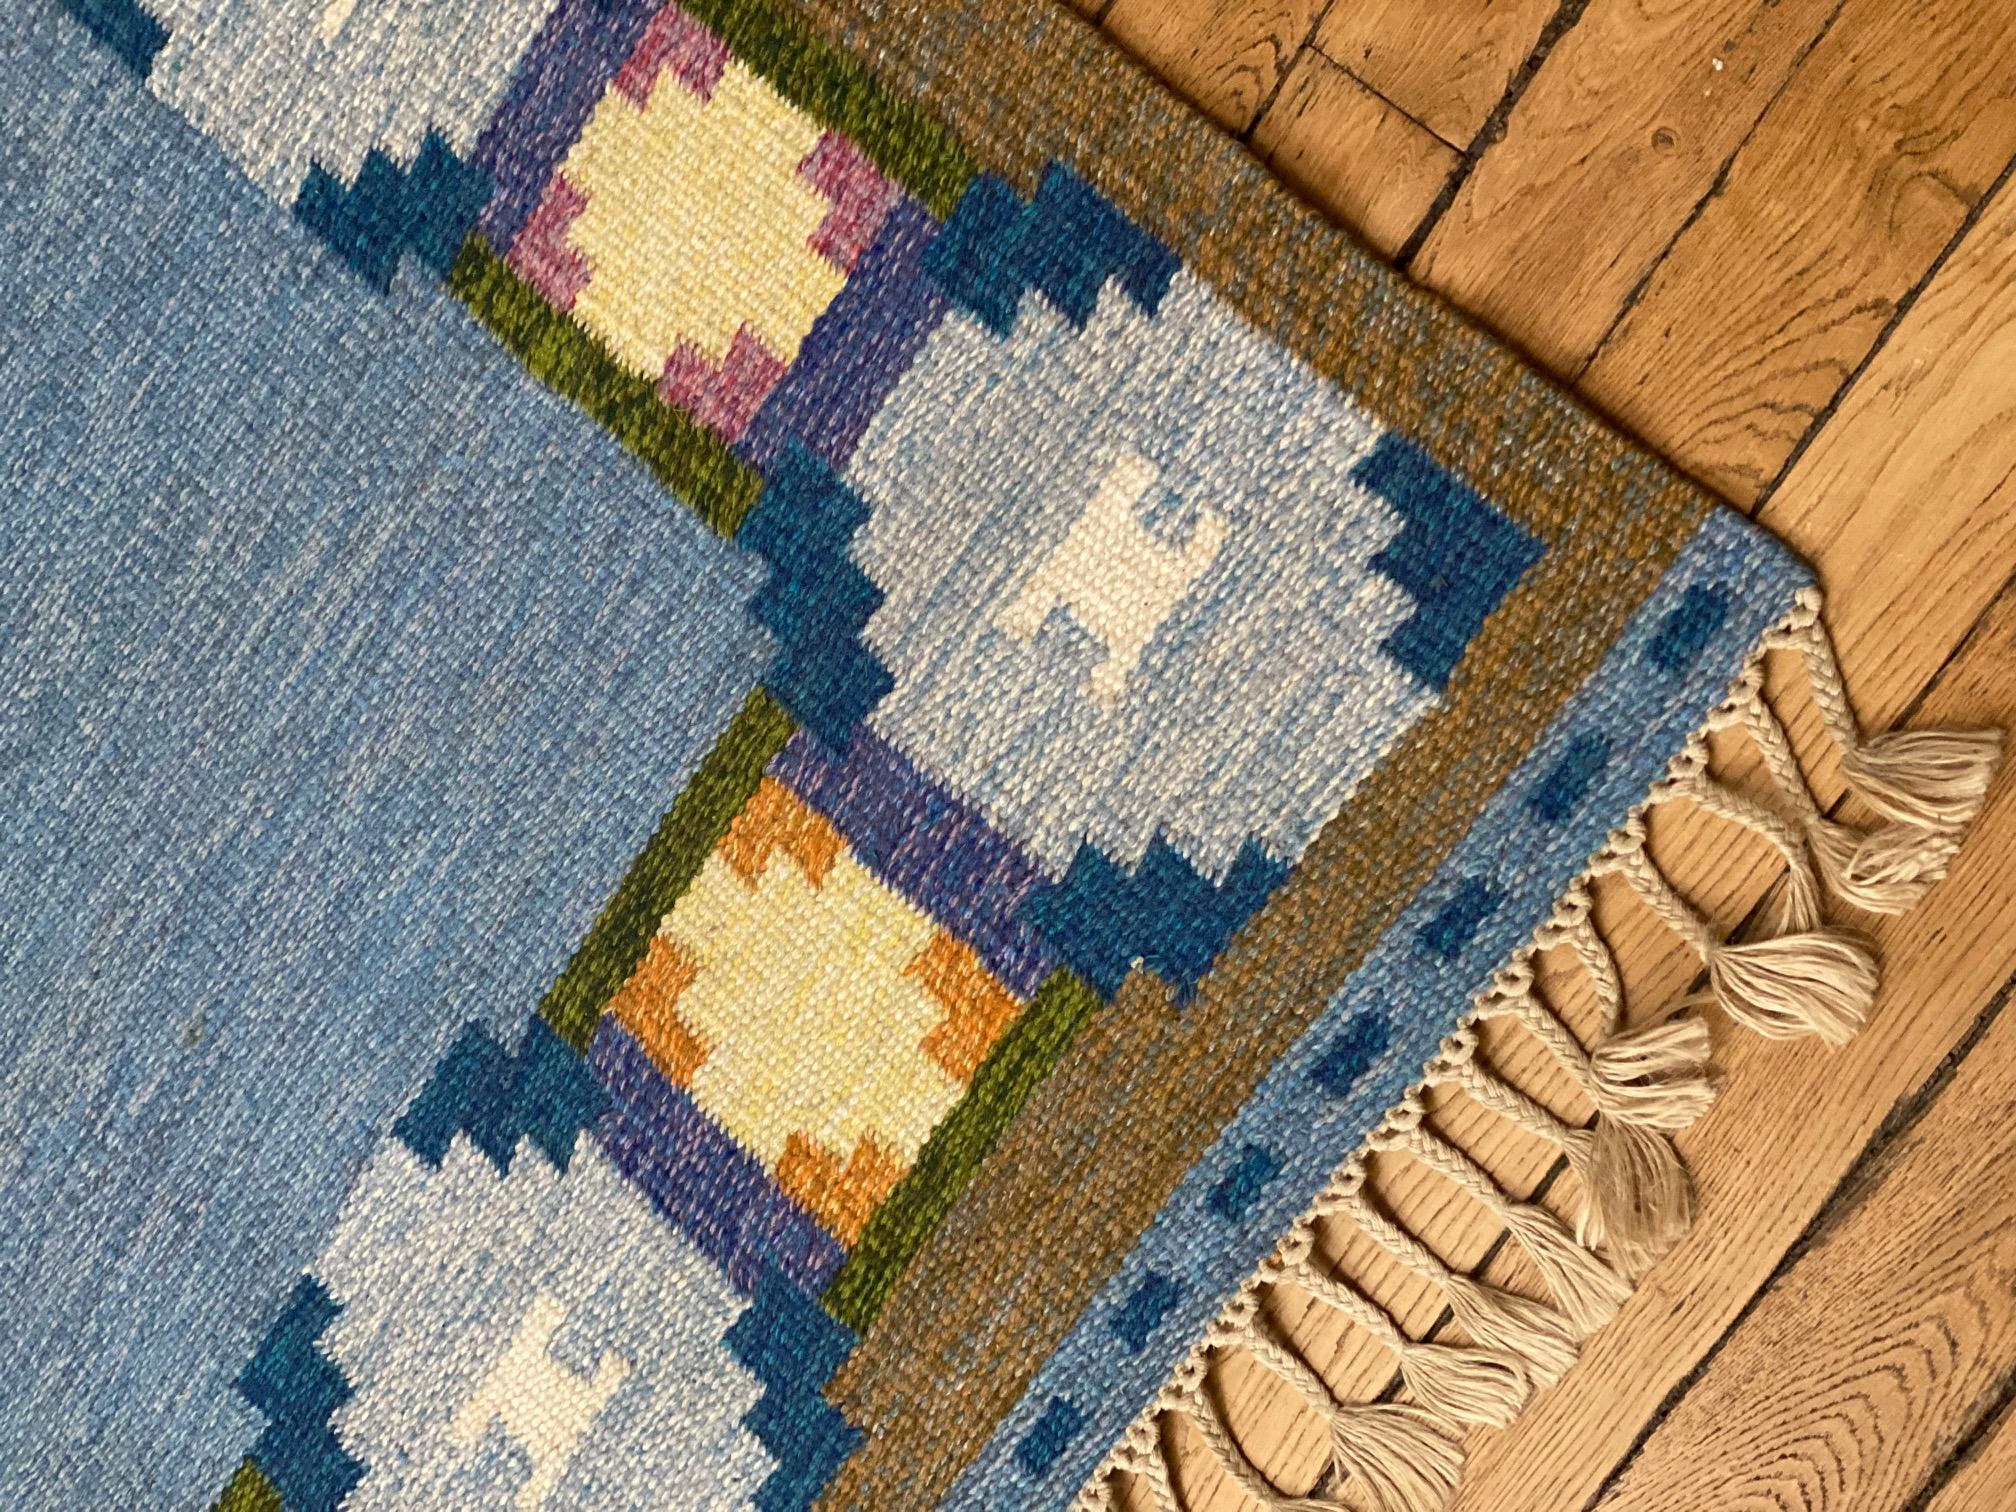 Mid-20th Century Vintage Swedish Flat-Weave Wood Carpet Signed by Ingegerd Silow For Sale